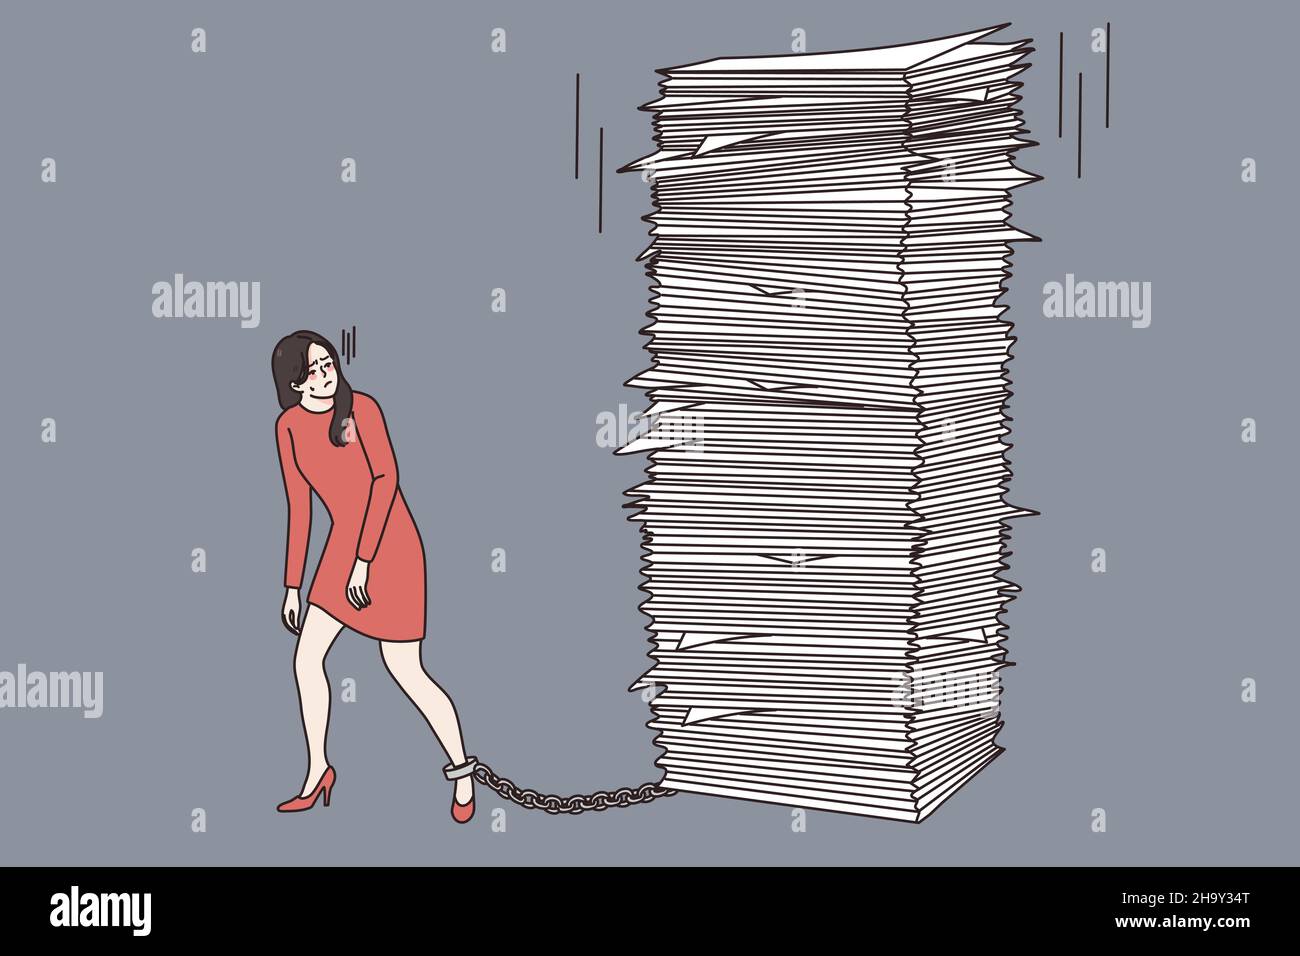 Stressed businesswoman tied by work burden, try to manage meet deadline. Woman employee or worker suffer from workload in office, have stack or paperwork or documents. Vector illustration.  Stock Vector